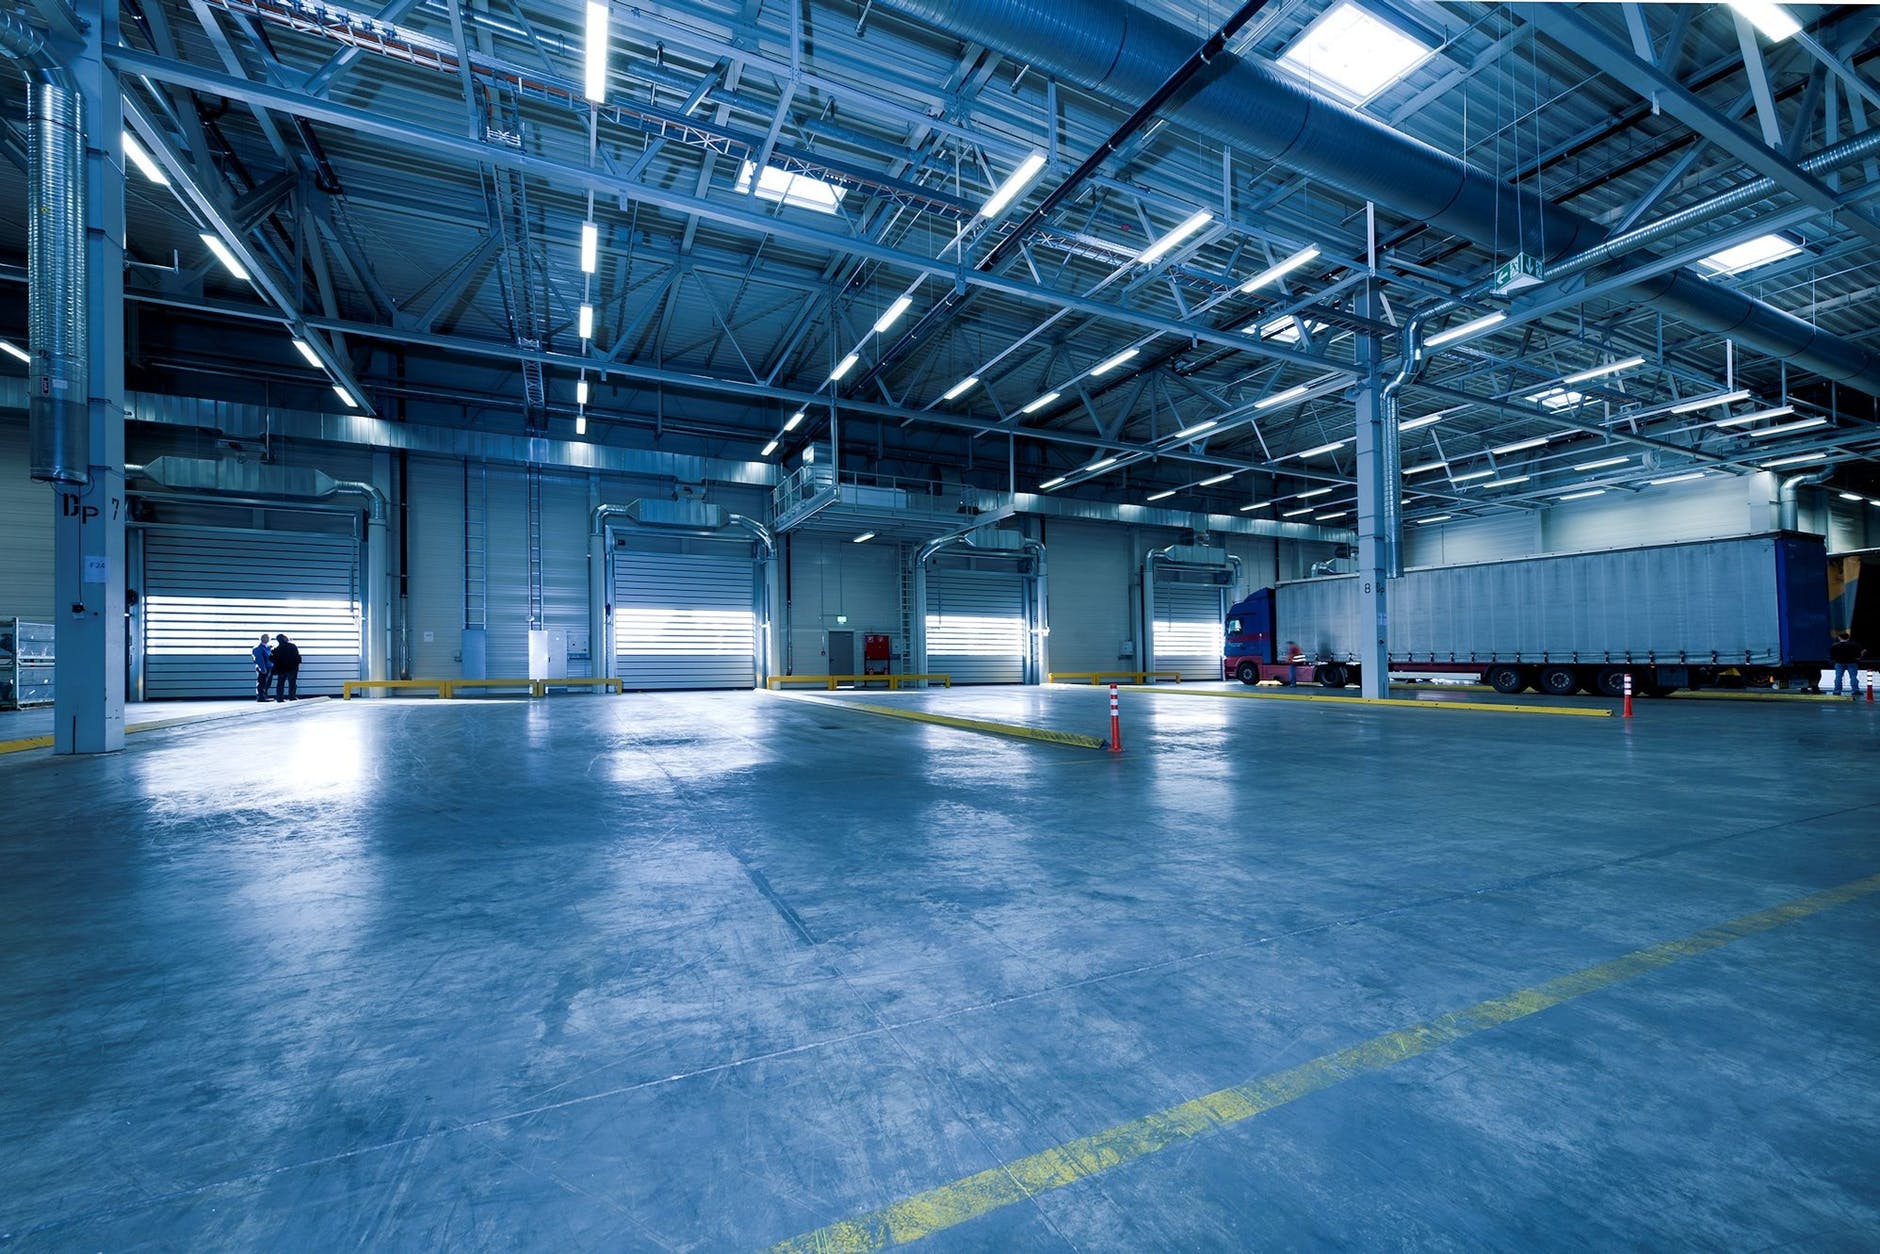 Choosing the Best Lighting for Industrial and Commercial Spaces